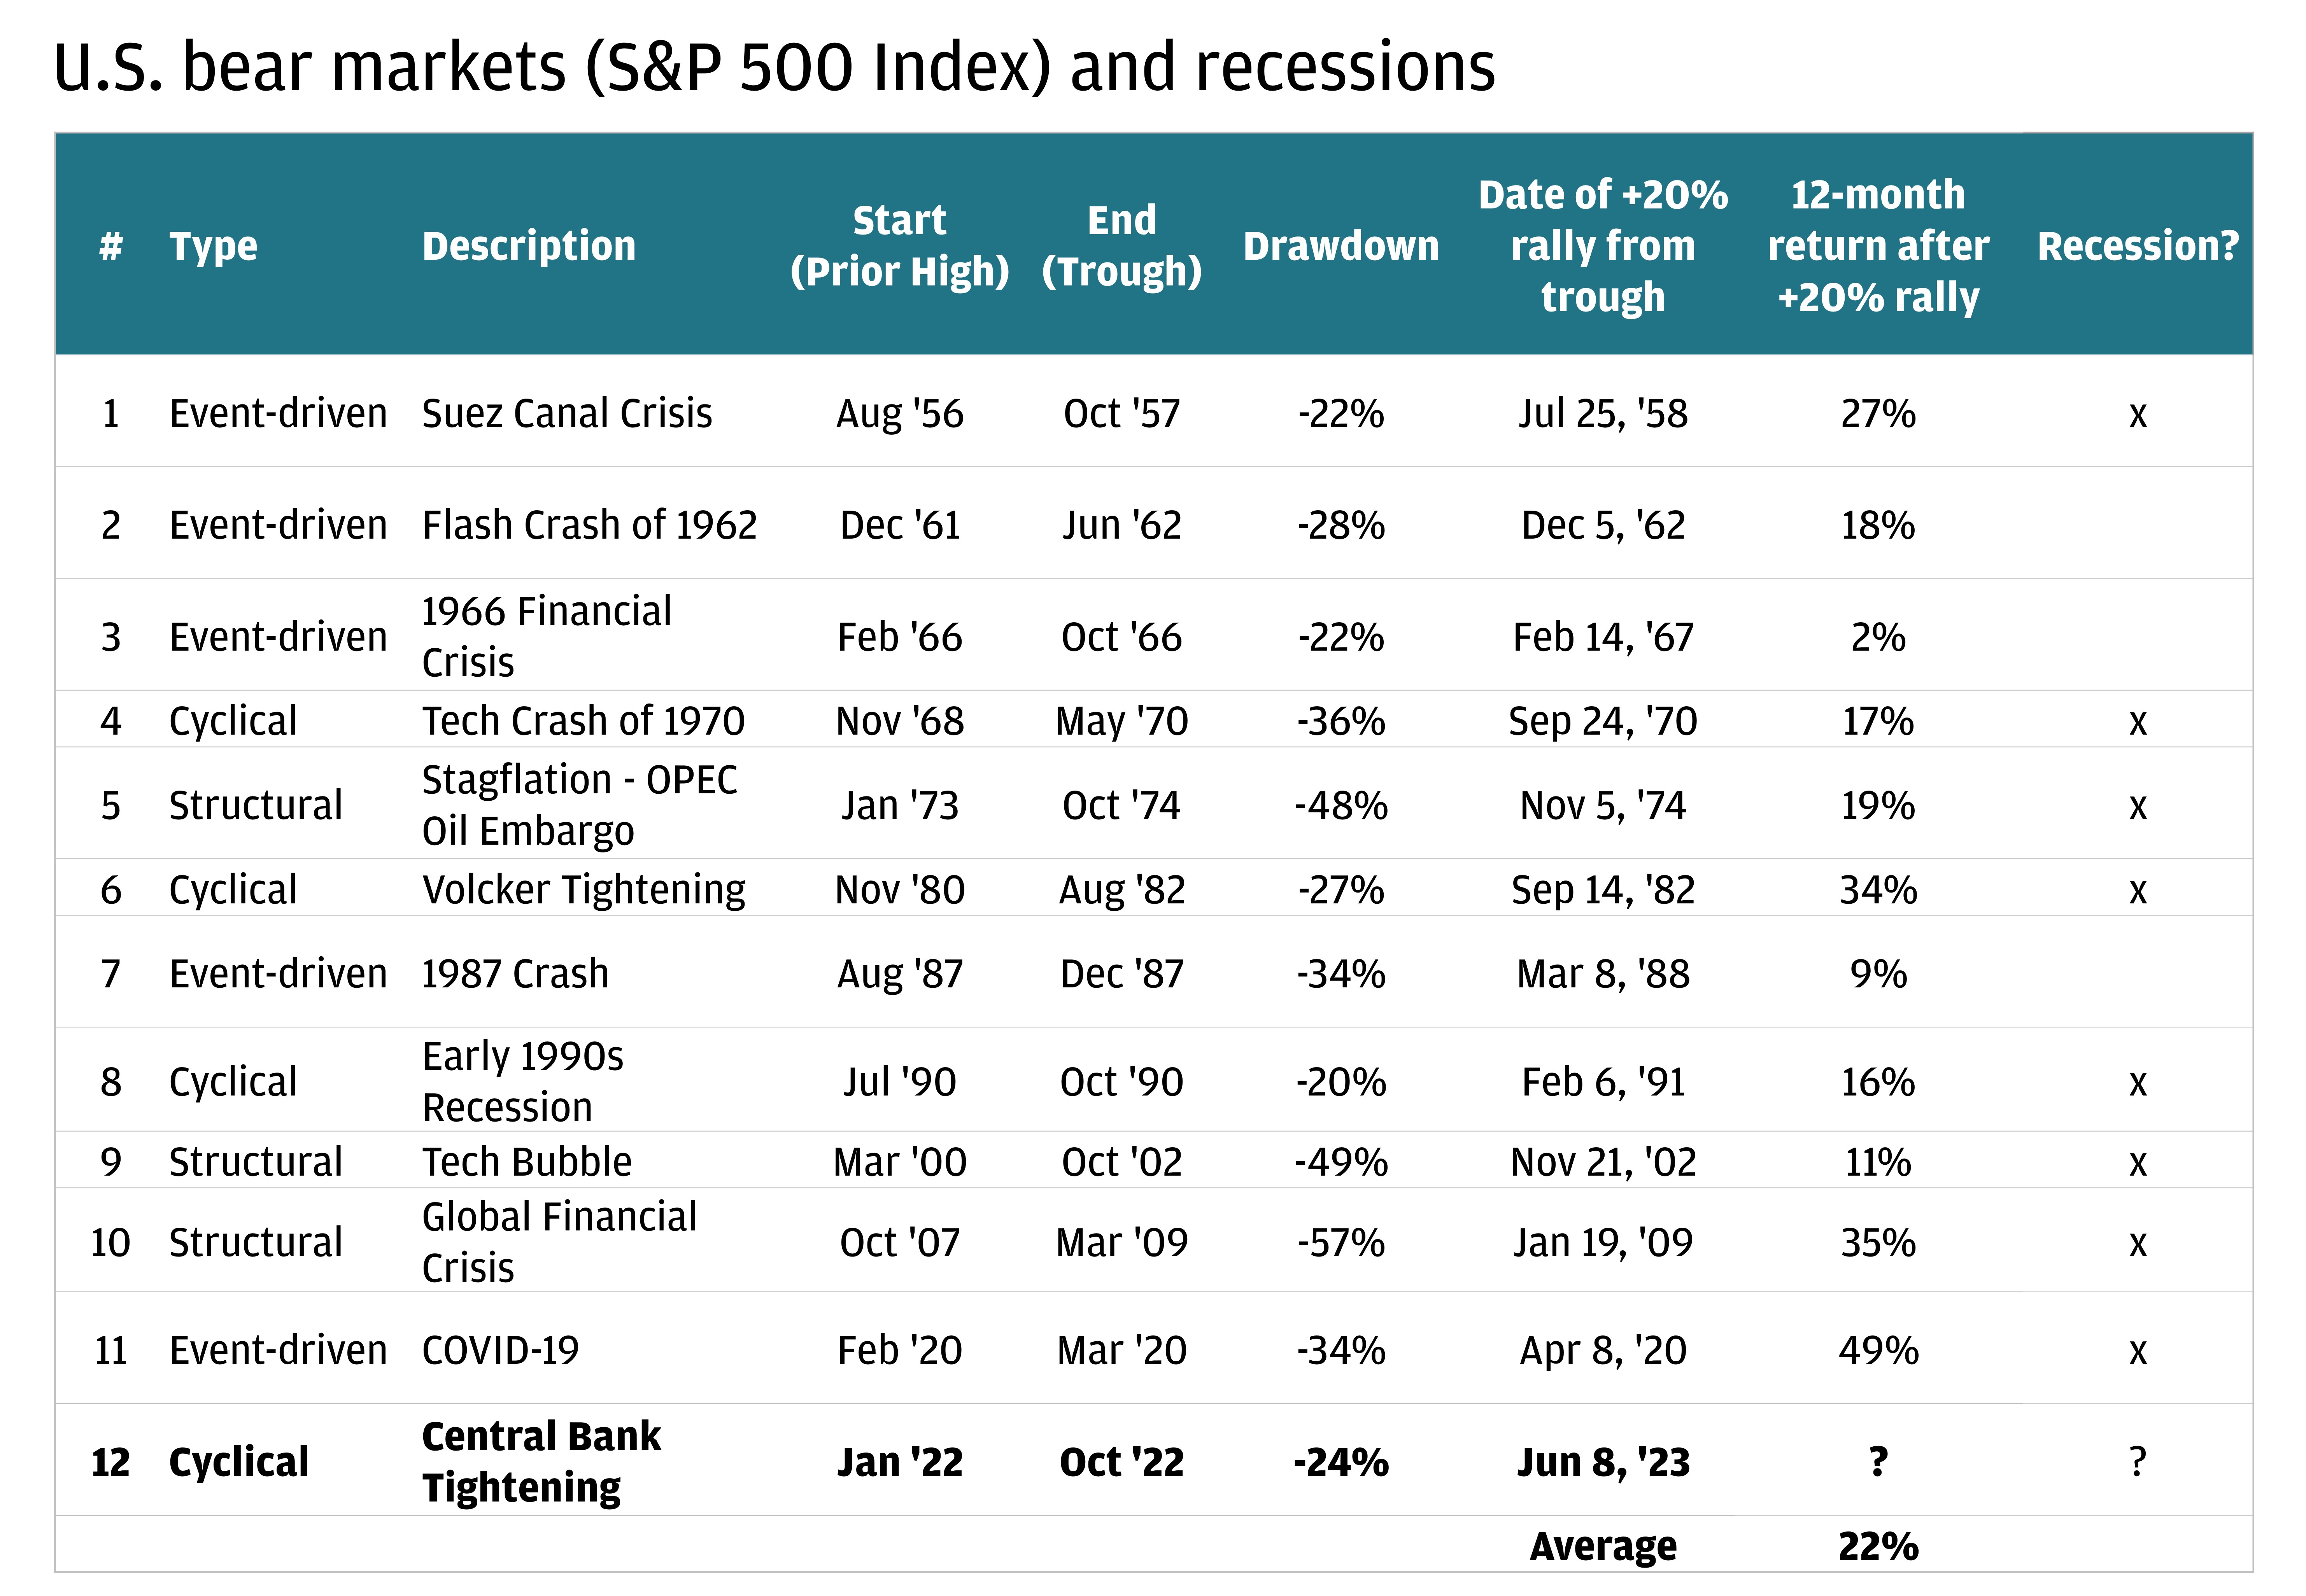 The table describes the U.S. bear markets (S&P 500 Index) in history. And all bear markets are displayed in a list format.